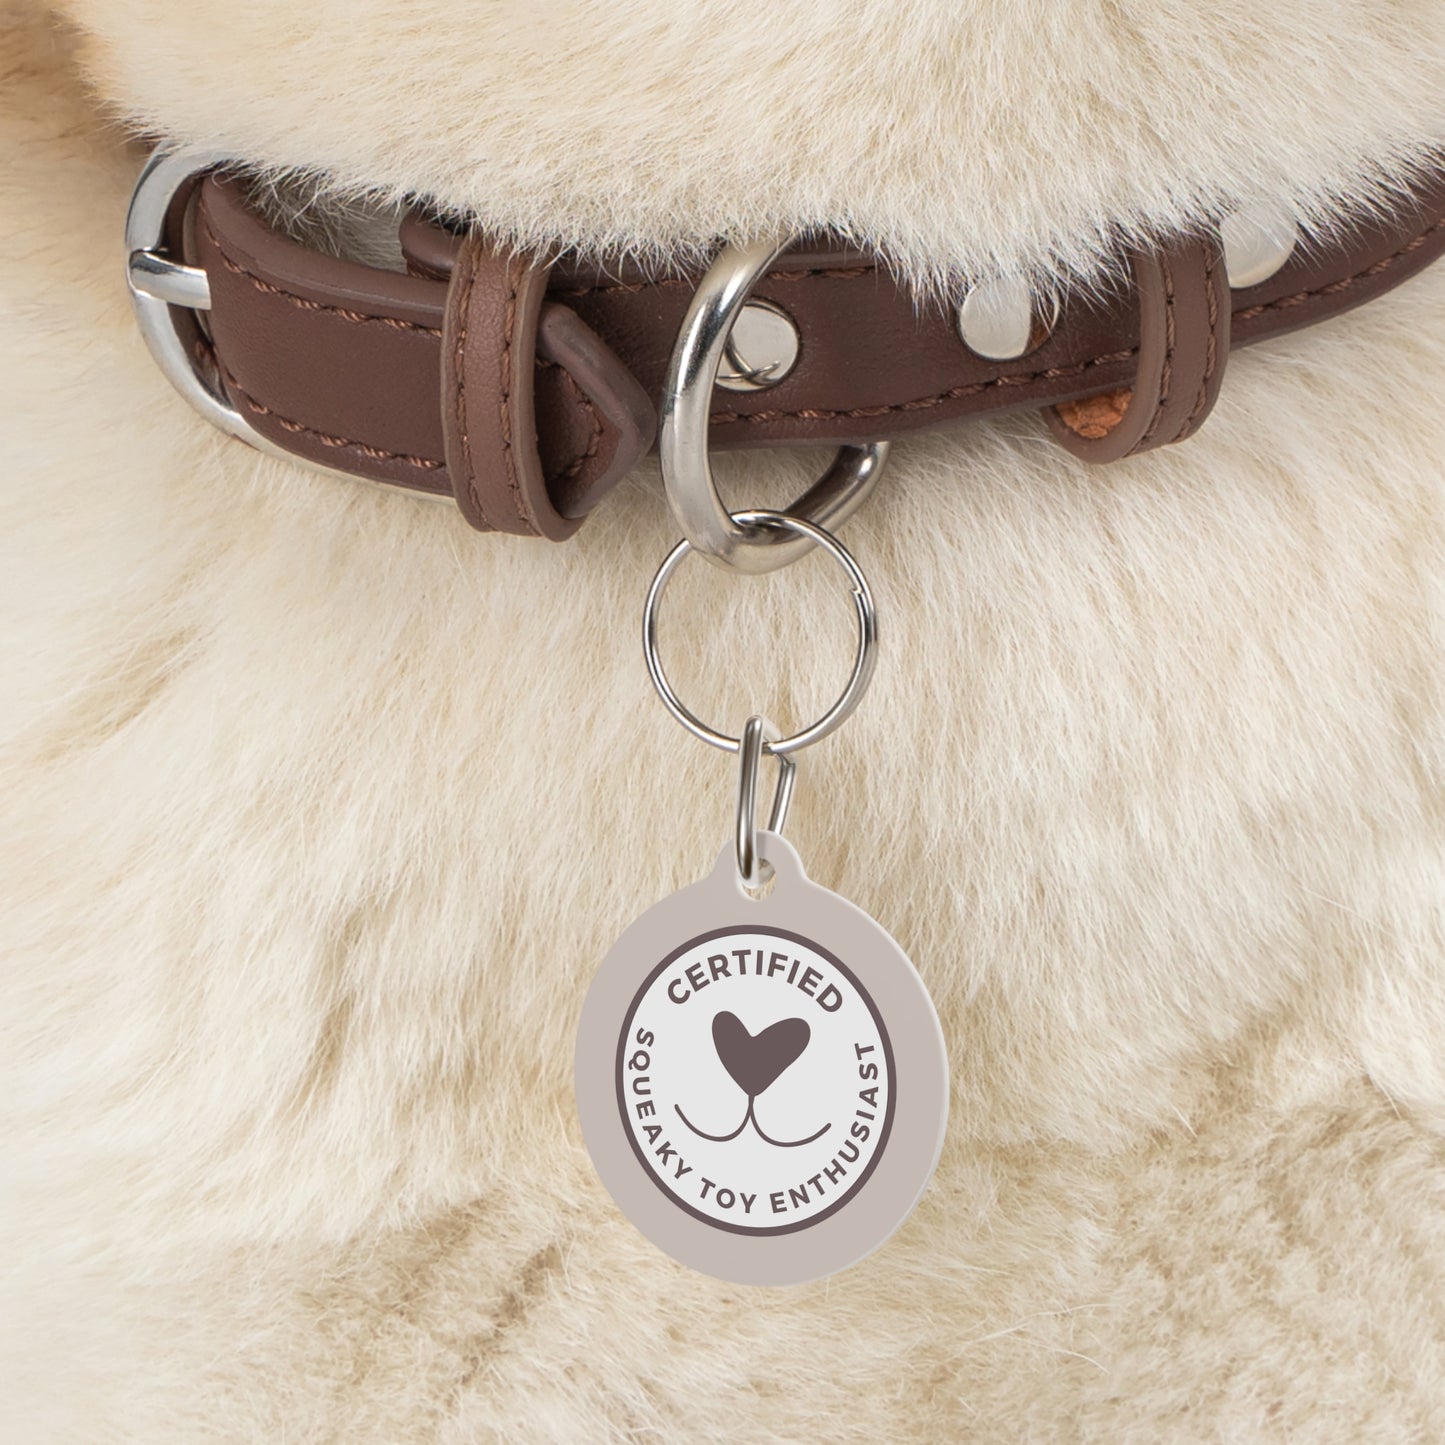 Certified Squeaky Toy Enthusiast  - Pet Tag